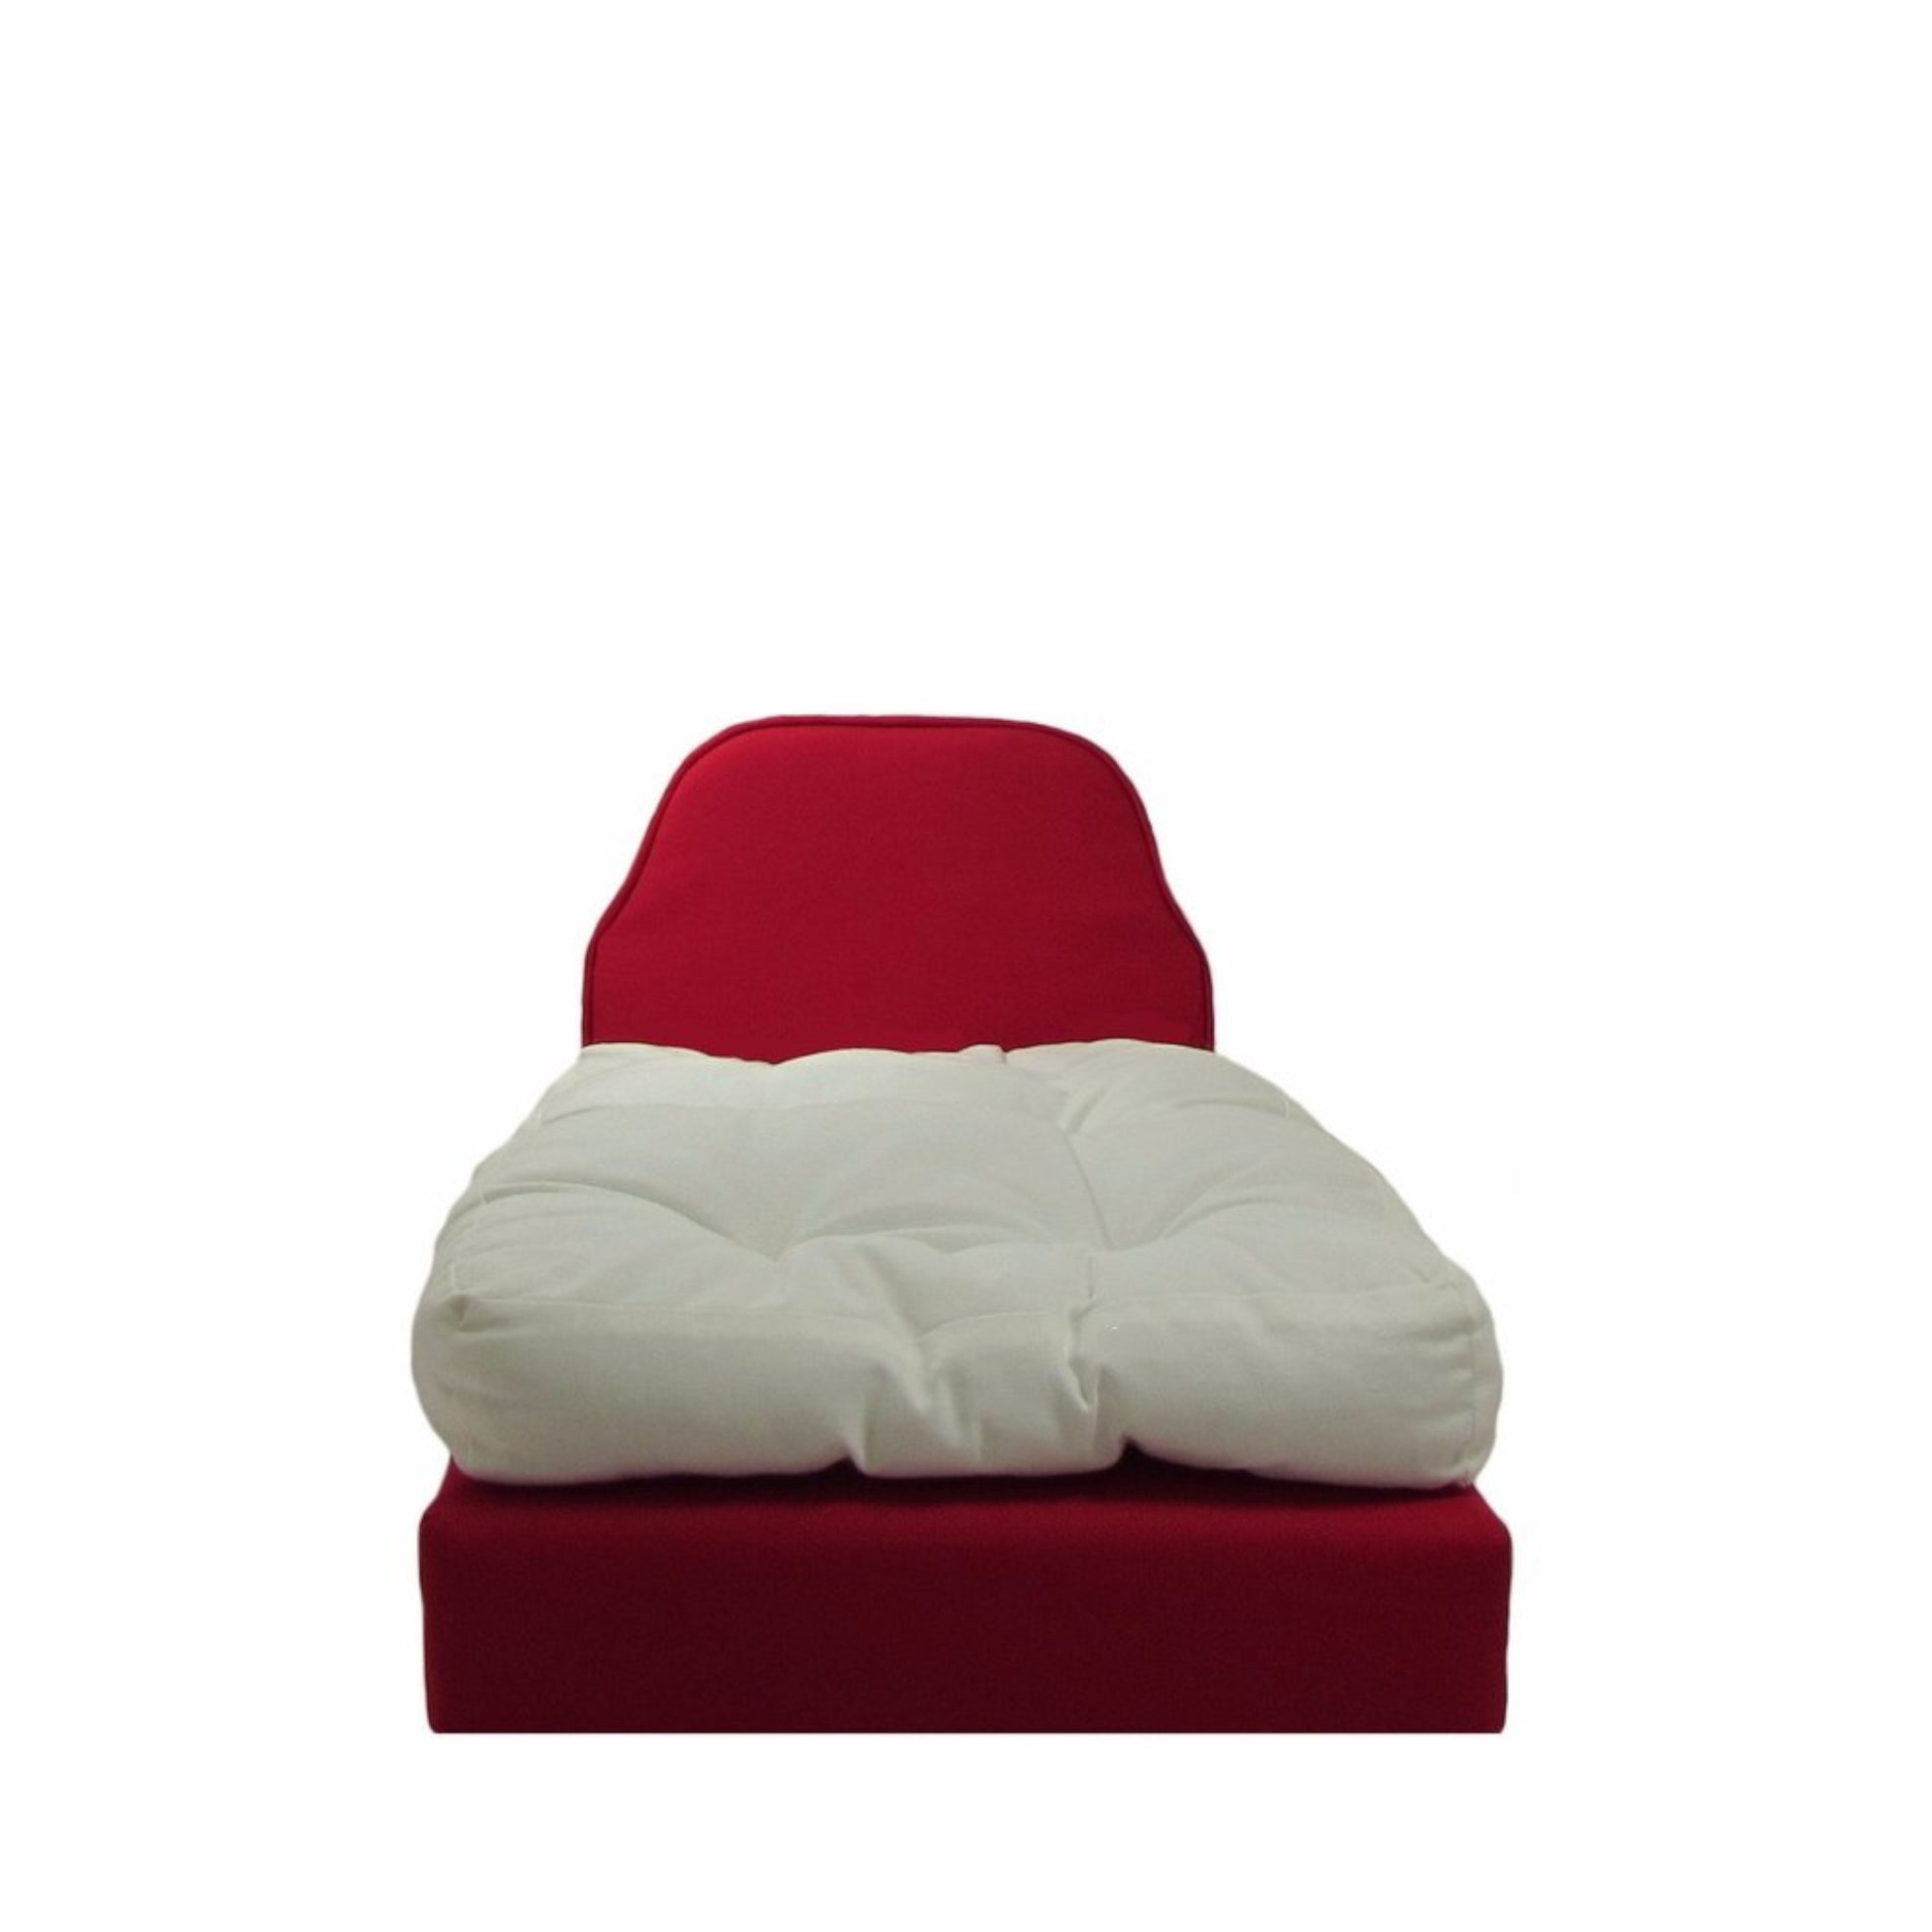 Upholstered Red Doll Bed for 18-inch doll Second view